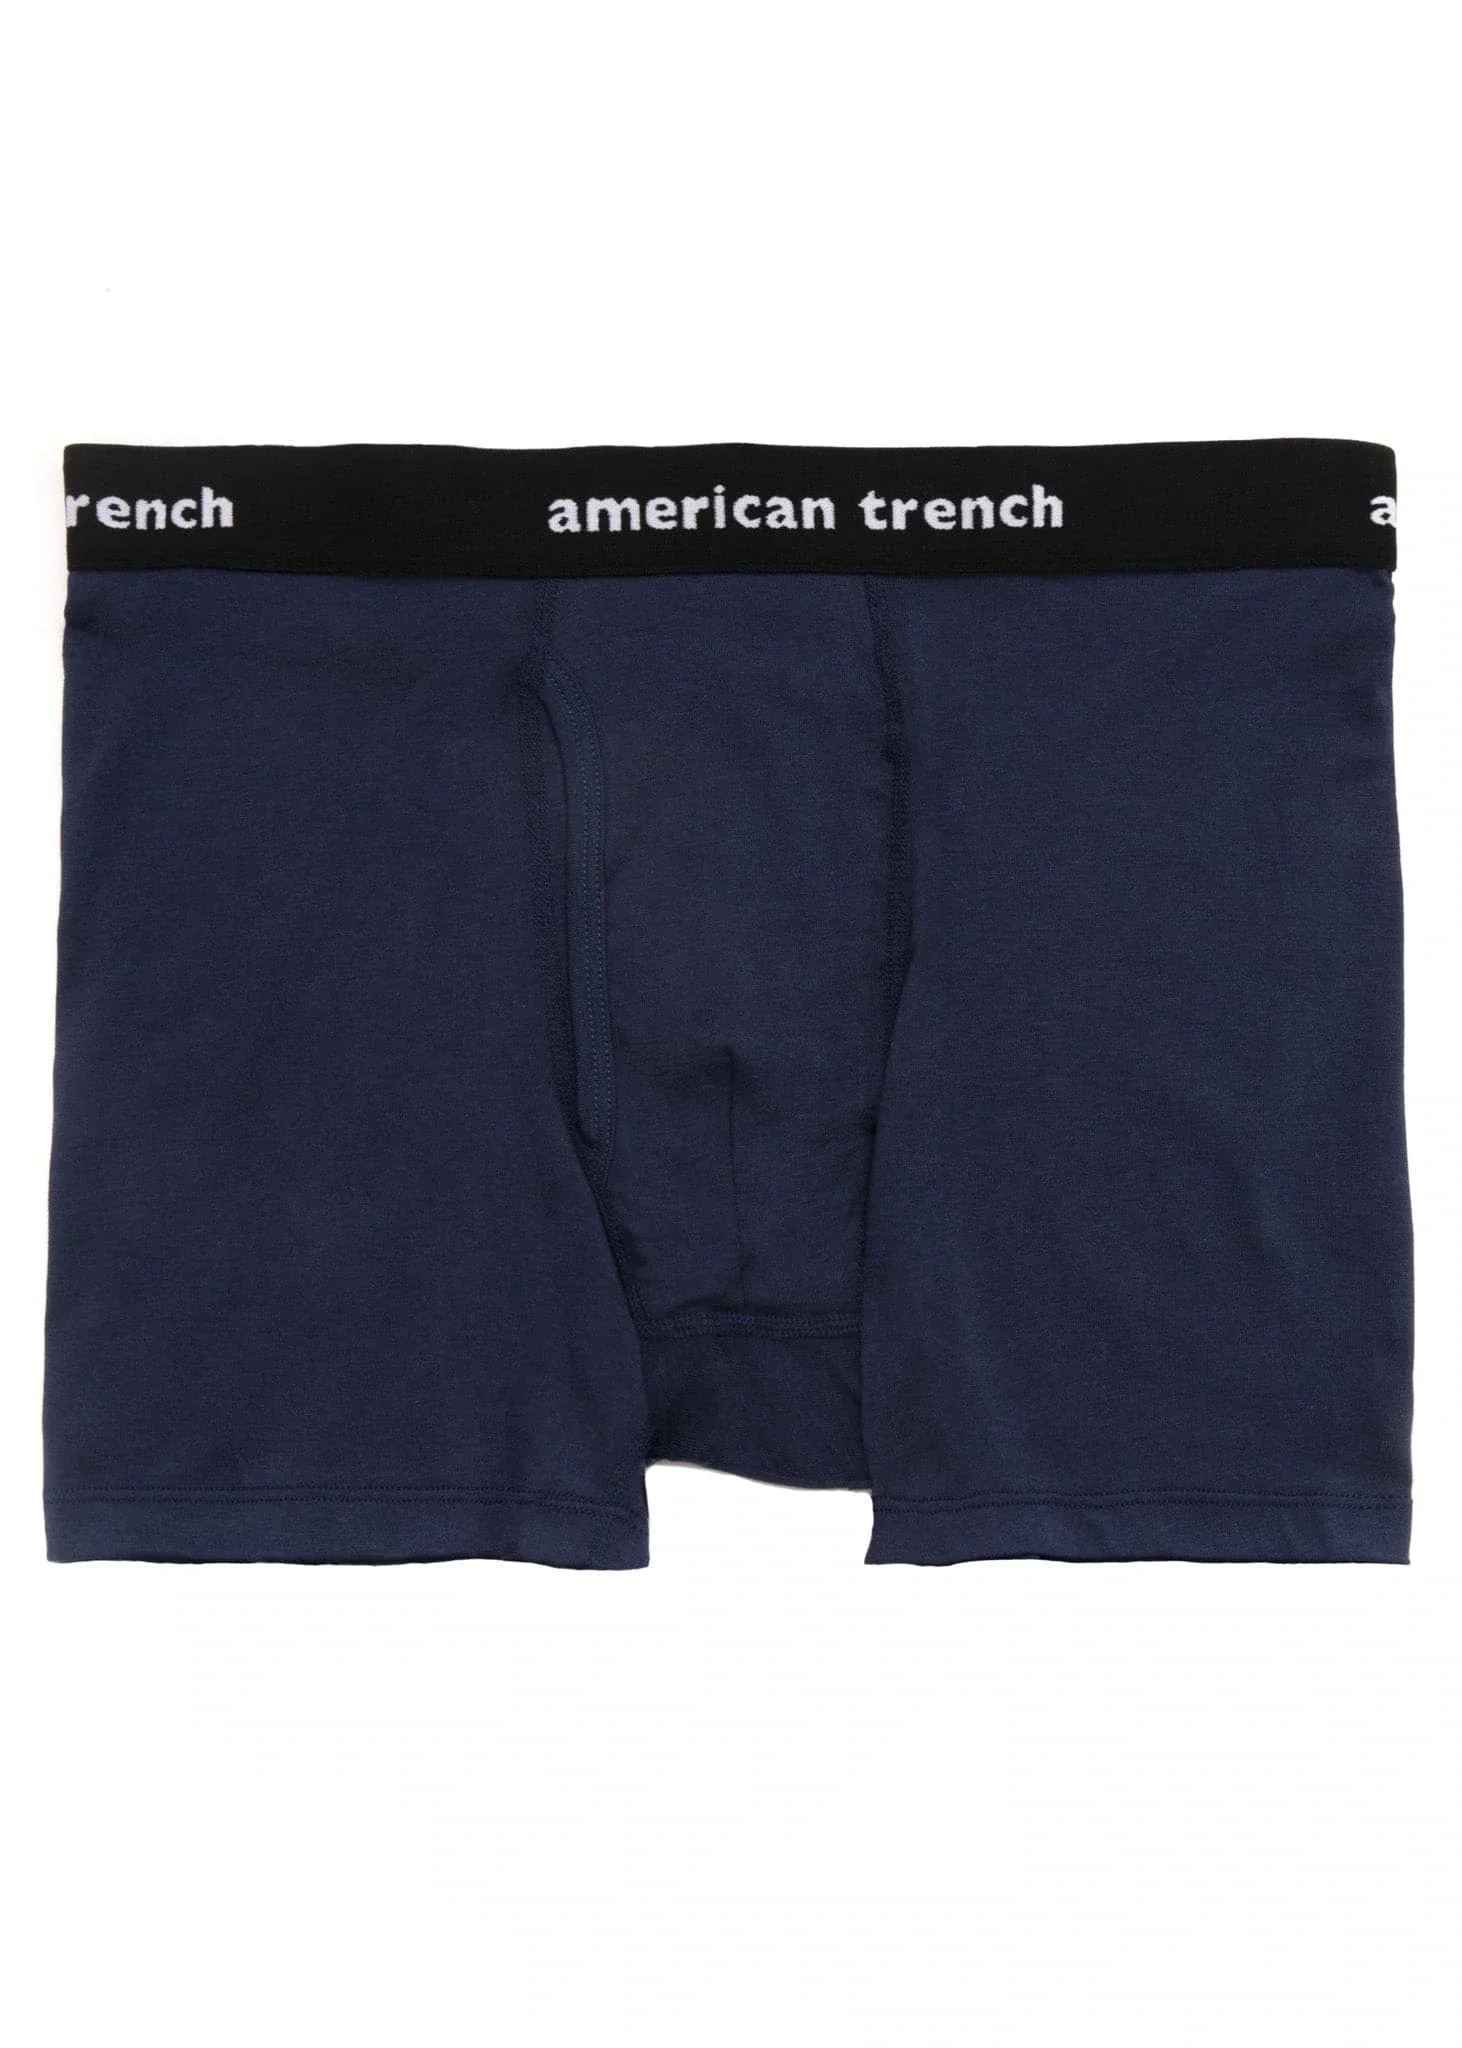 Image of Boxer Briefs